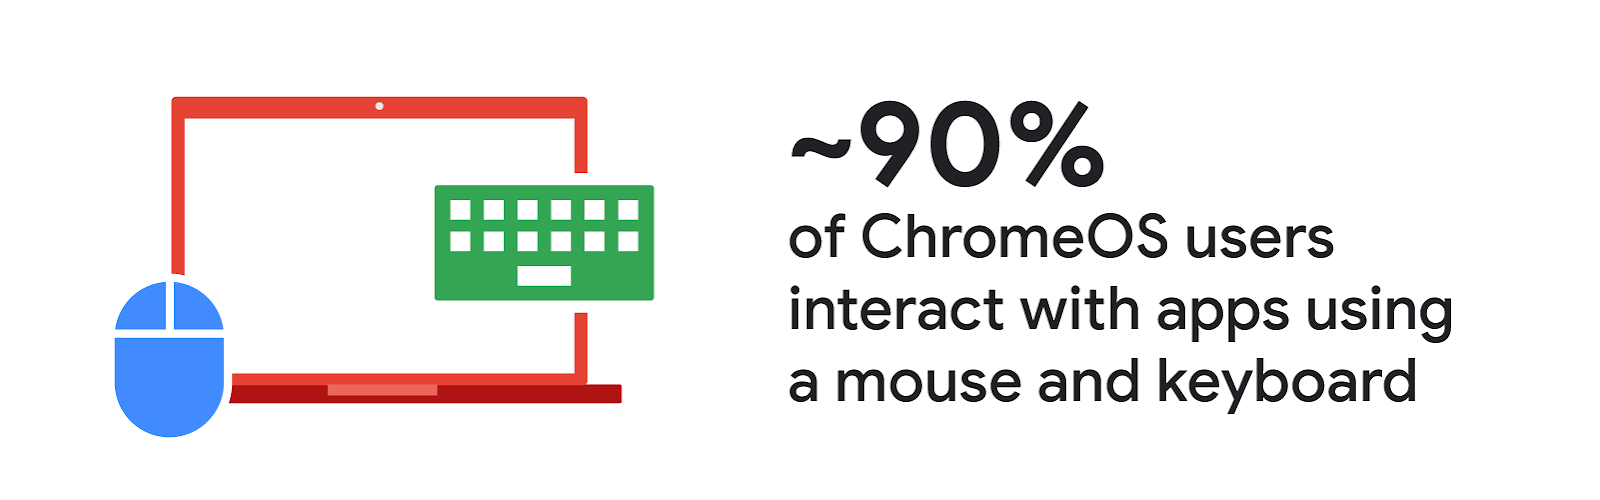 About 90% of ChromeOS users interact with apps using a mouse and keyboard